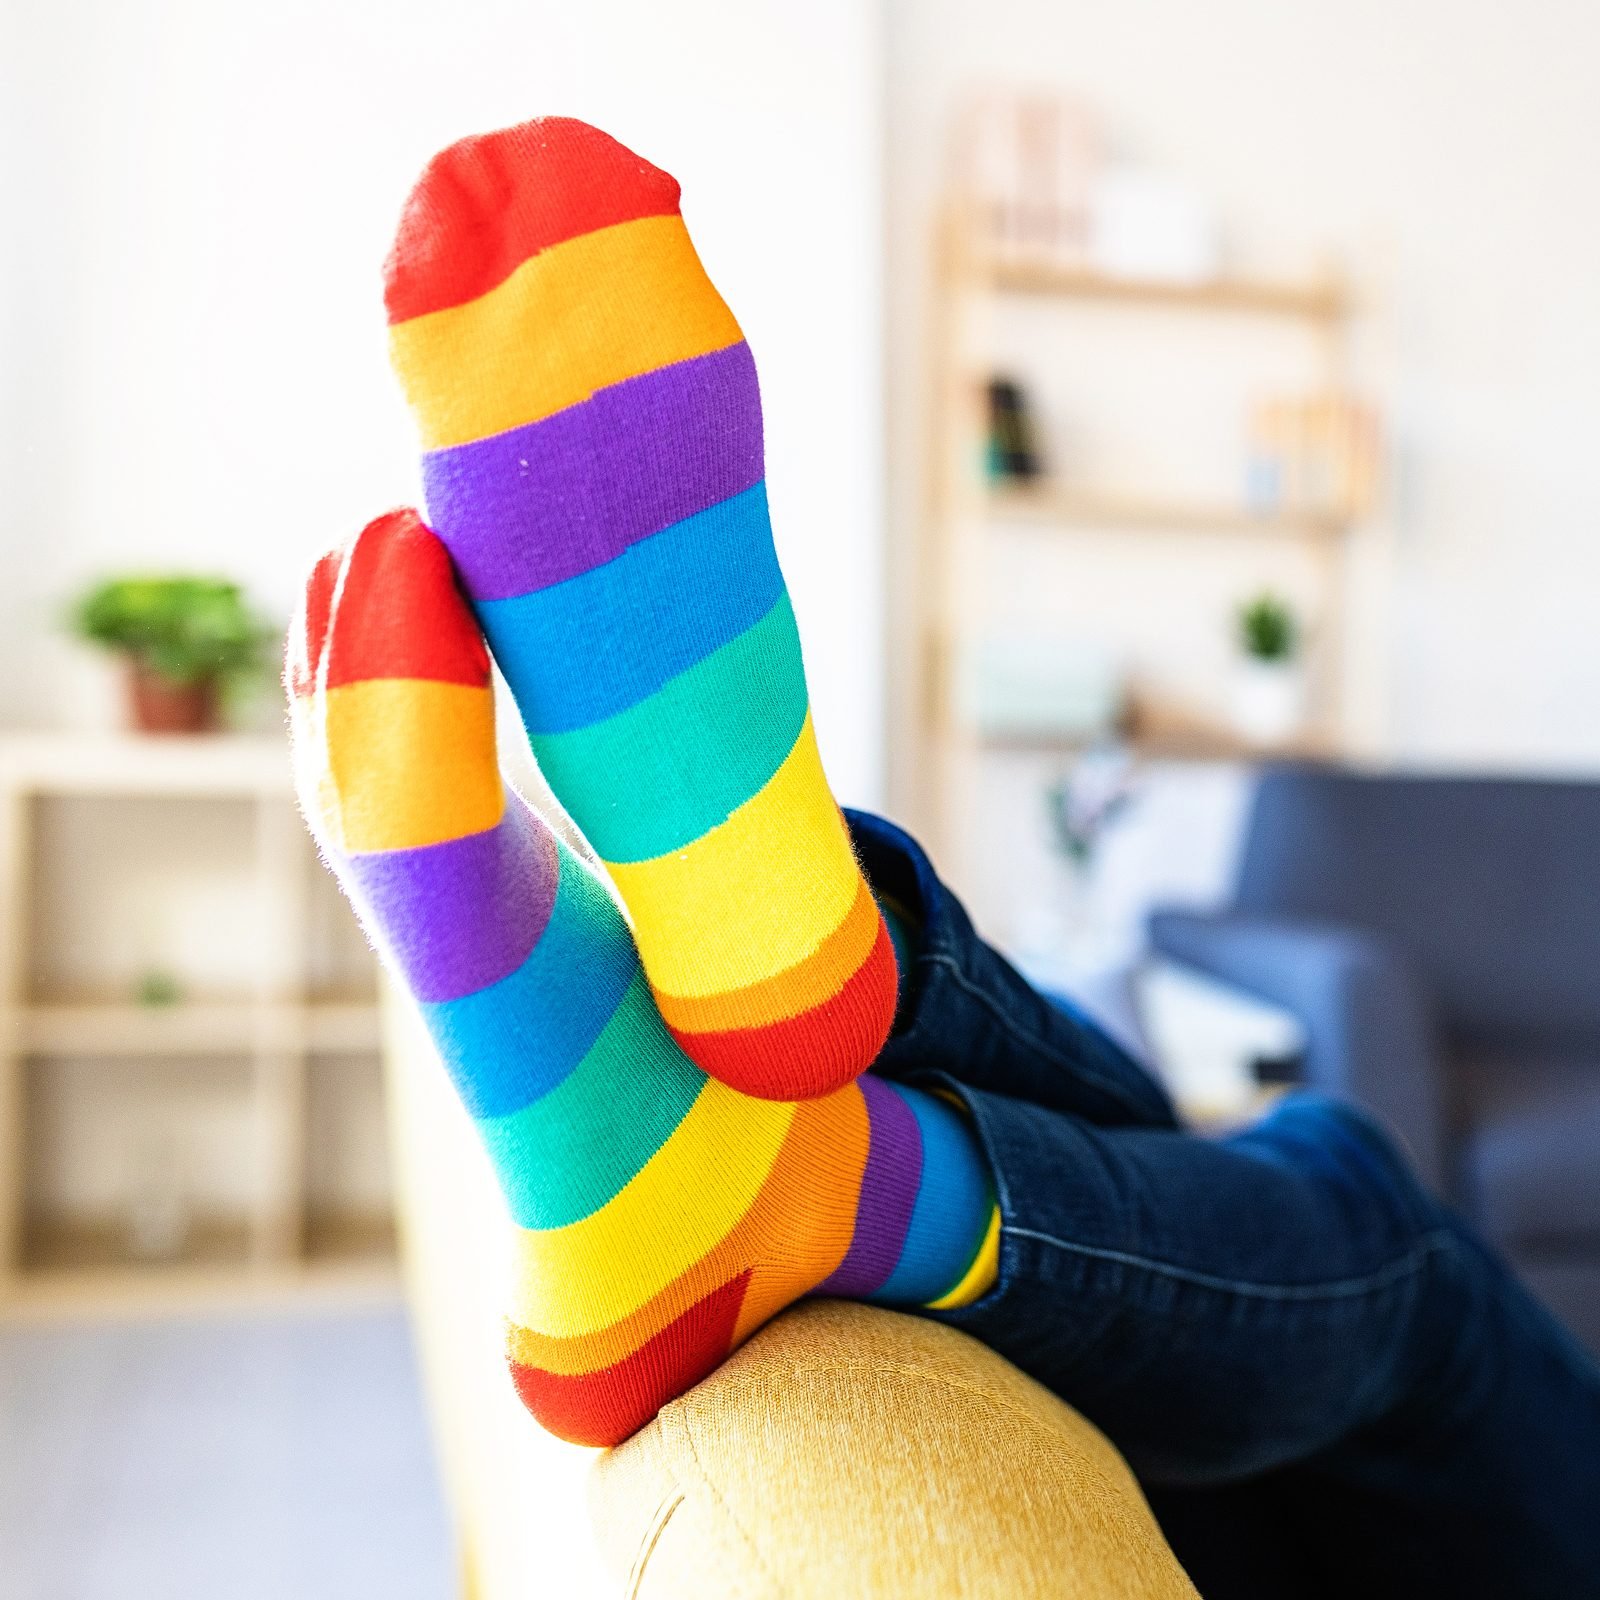 Wearing socks to bed could aid sleep and make you a better lover